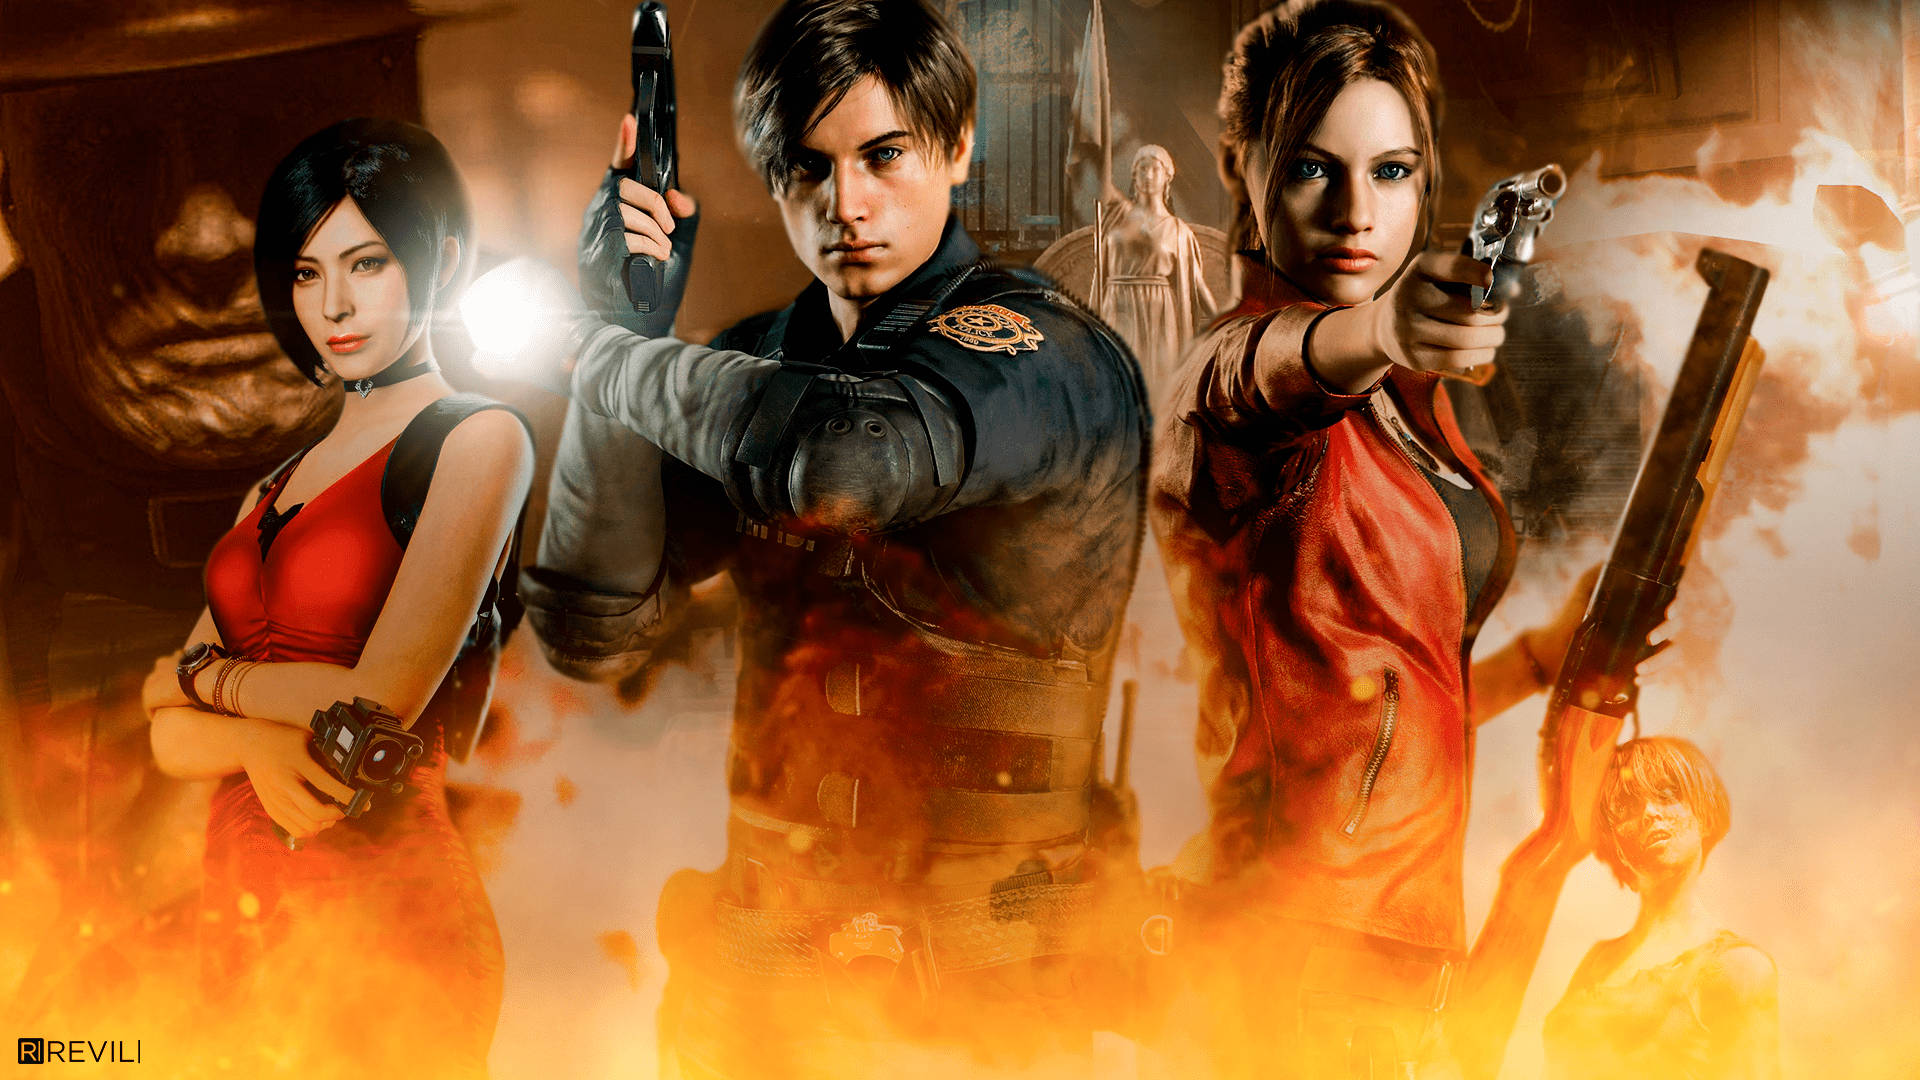 "Leon S. Kennedy and Claire Redfield fight for survival in the new Resident Evil 2 Remake." Wallpaper